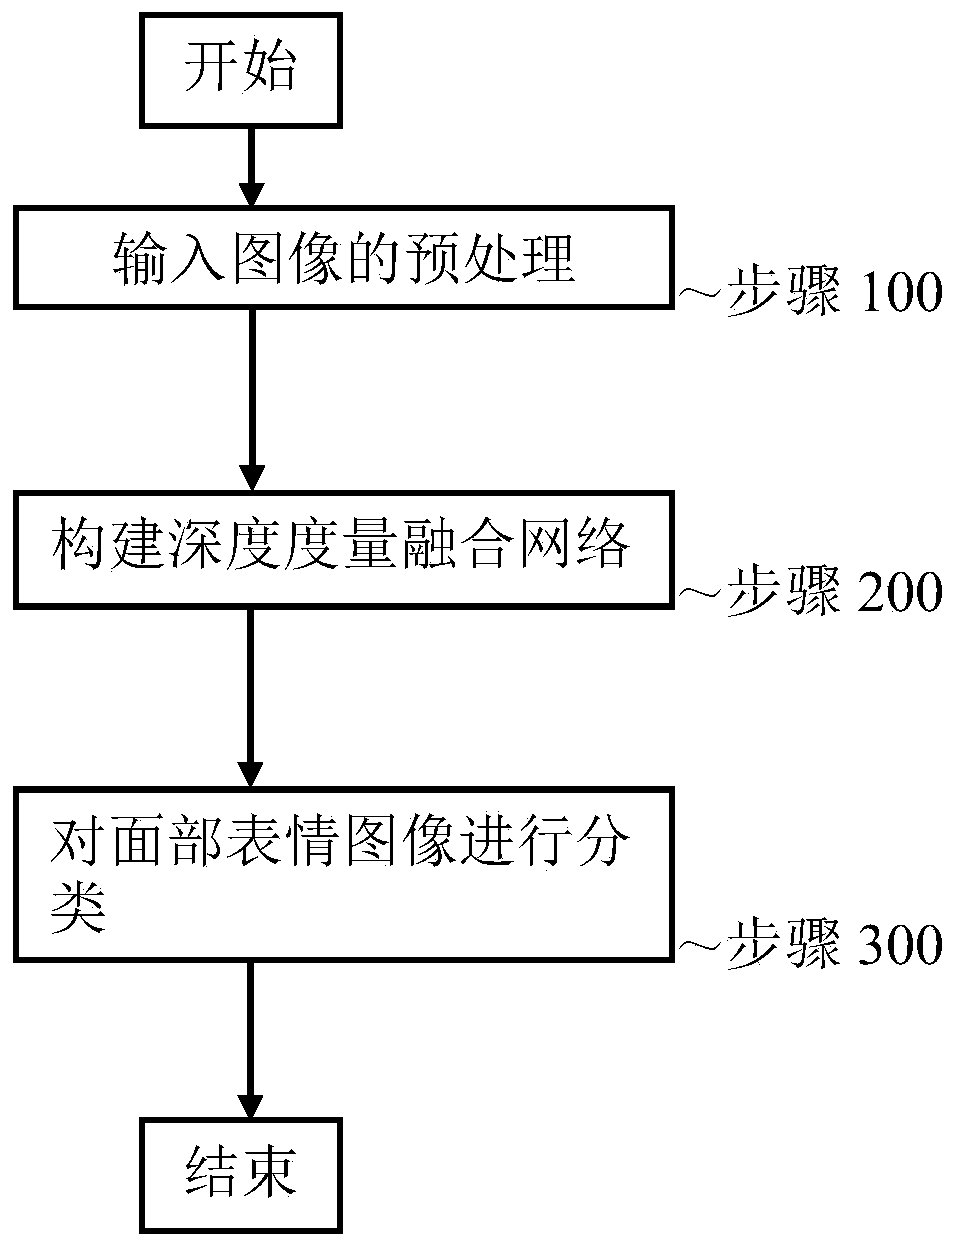 Facial expression recognition method based on depth measurement fusion network